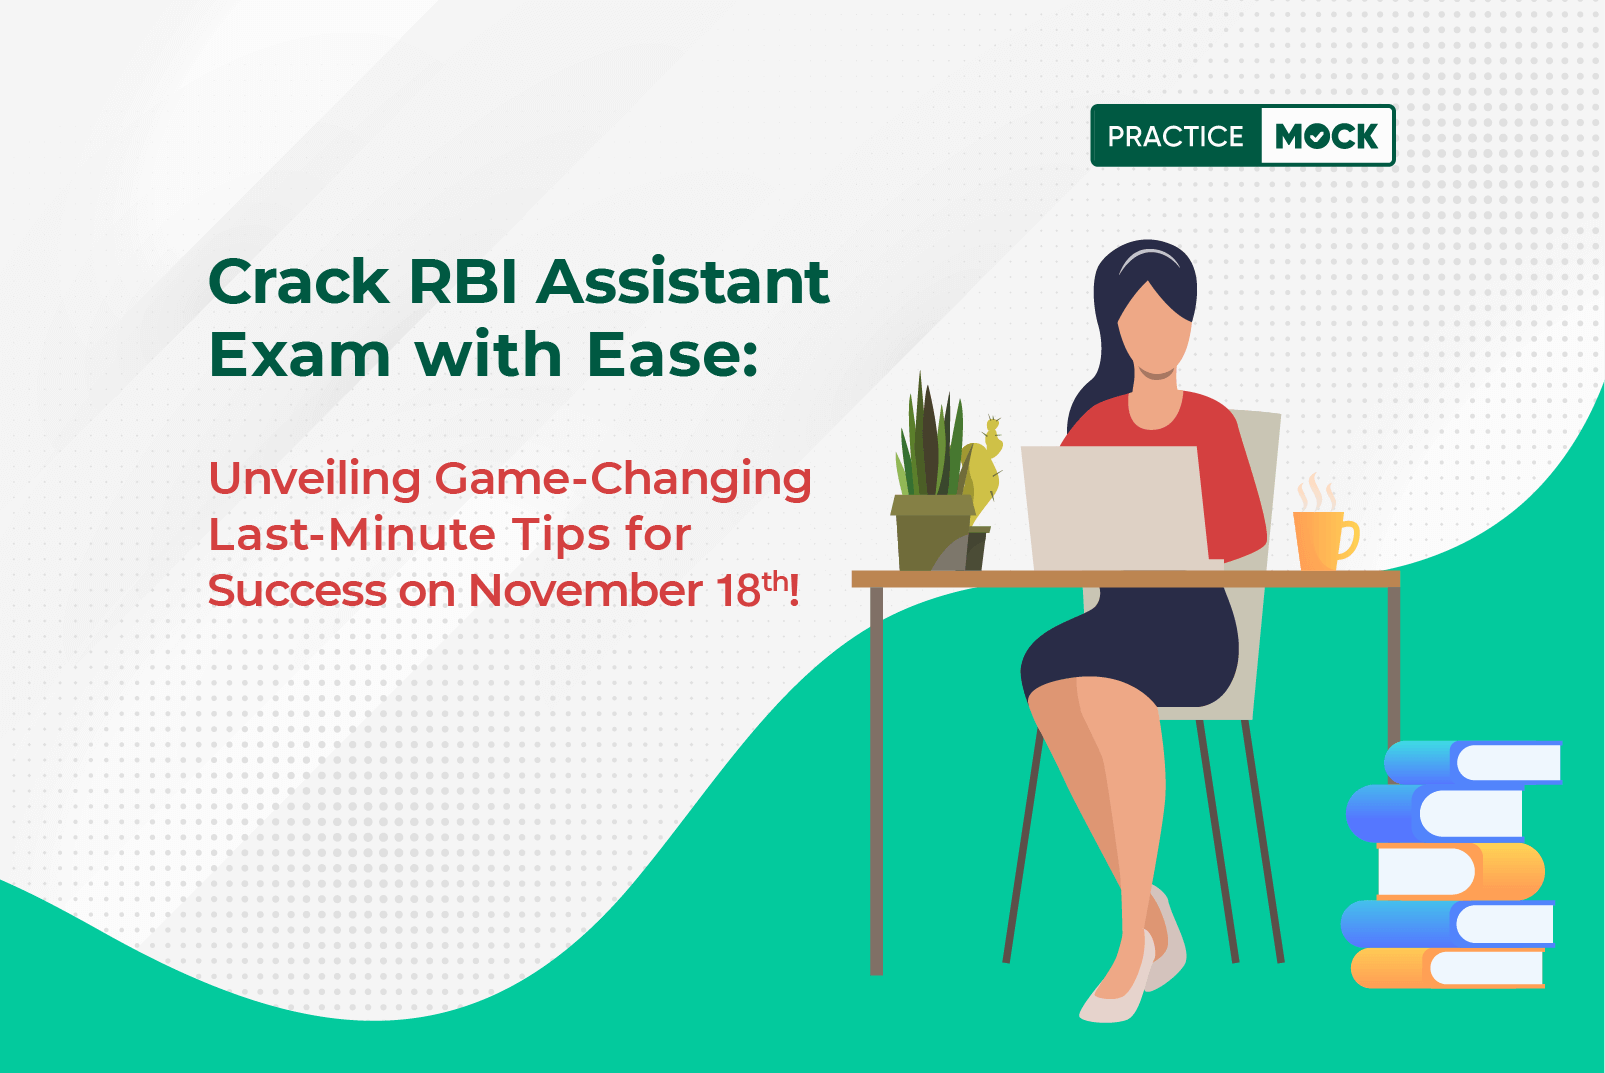 Crack the RBI Assistant Exam with Ease Unveiling Game-Changing Last-Minute Tips for Success on November 18!